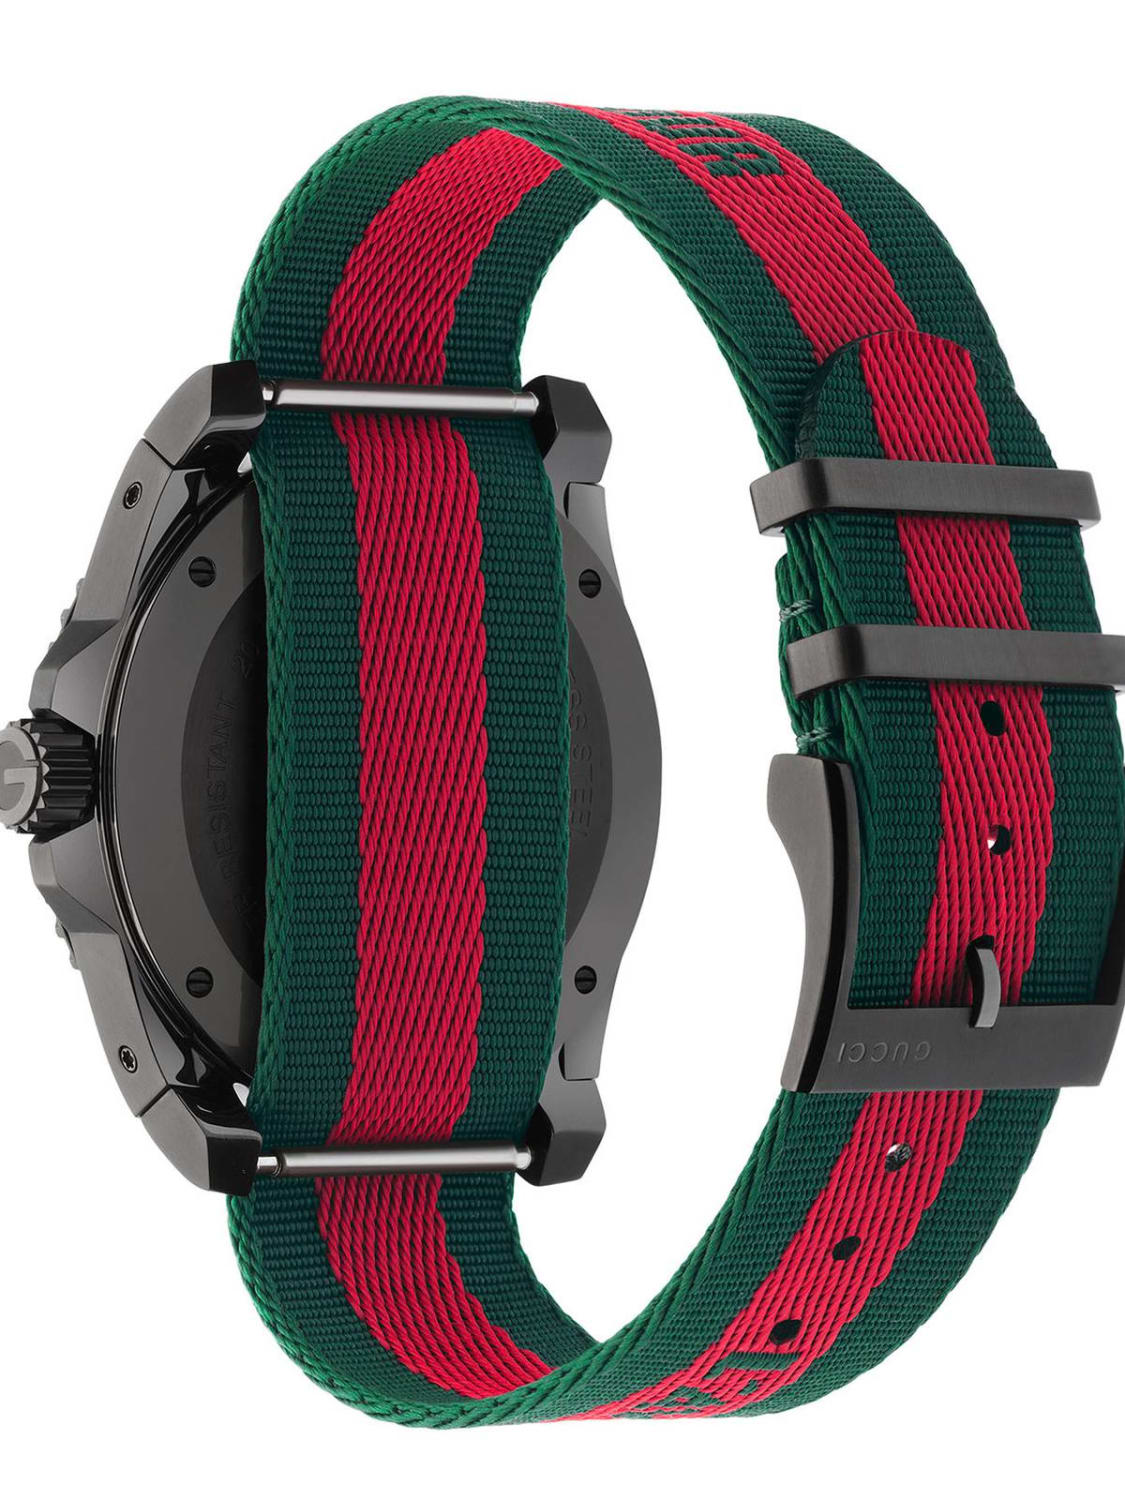 Watch Gucci: Le Marché des Merveilles watch case 38mm with Bee Web pattern green 2